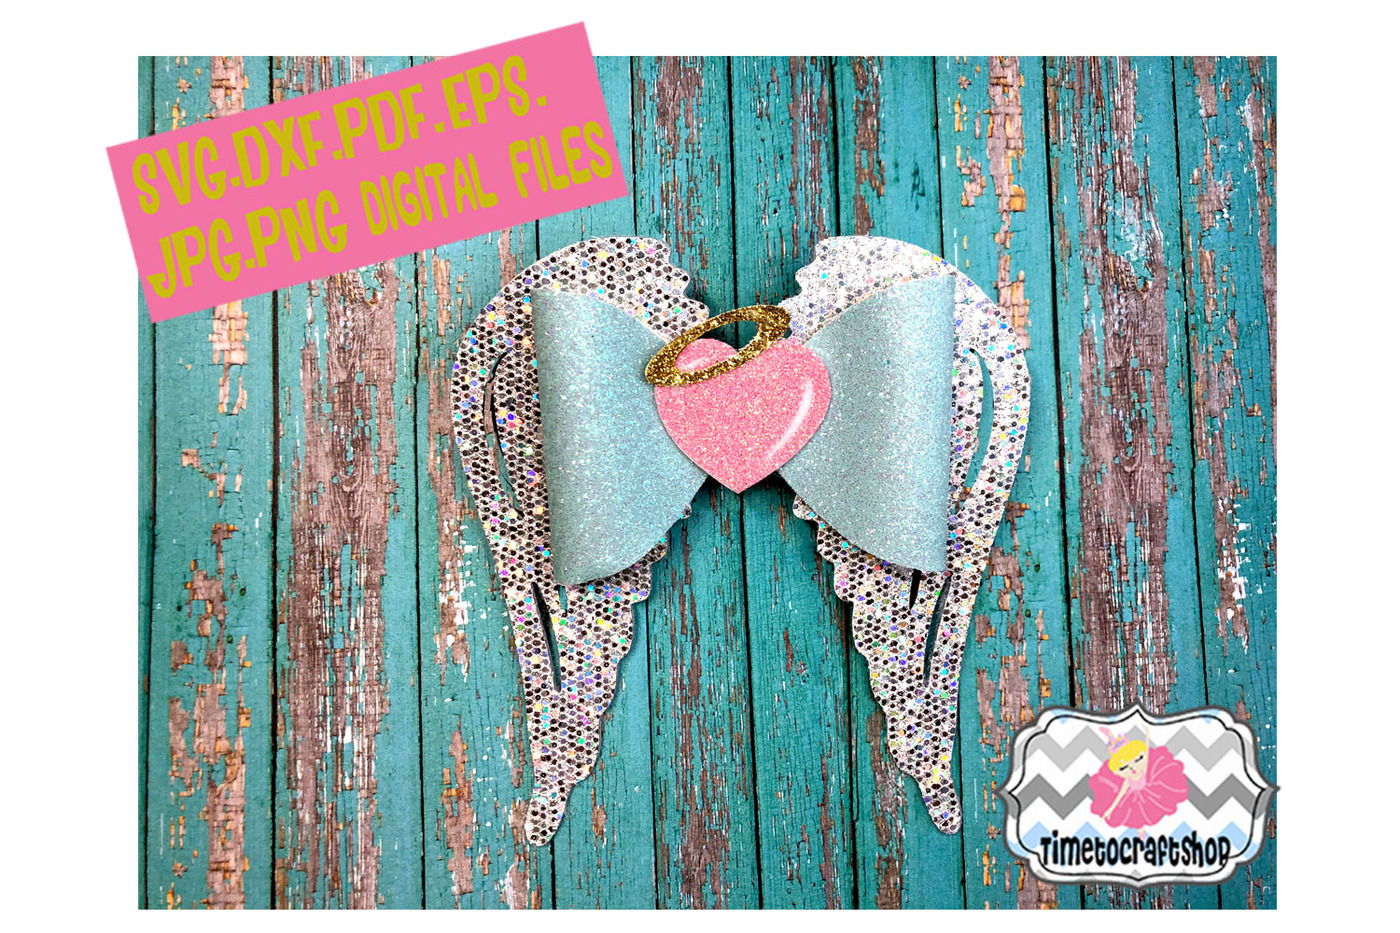 ori 3490858 970fcb1567b8143af3a87f4848765be83ef2273d angel wing heart halo hair bow template svg dxf pdf eps jpg png